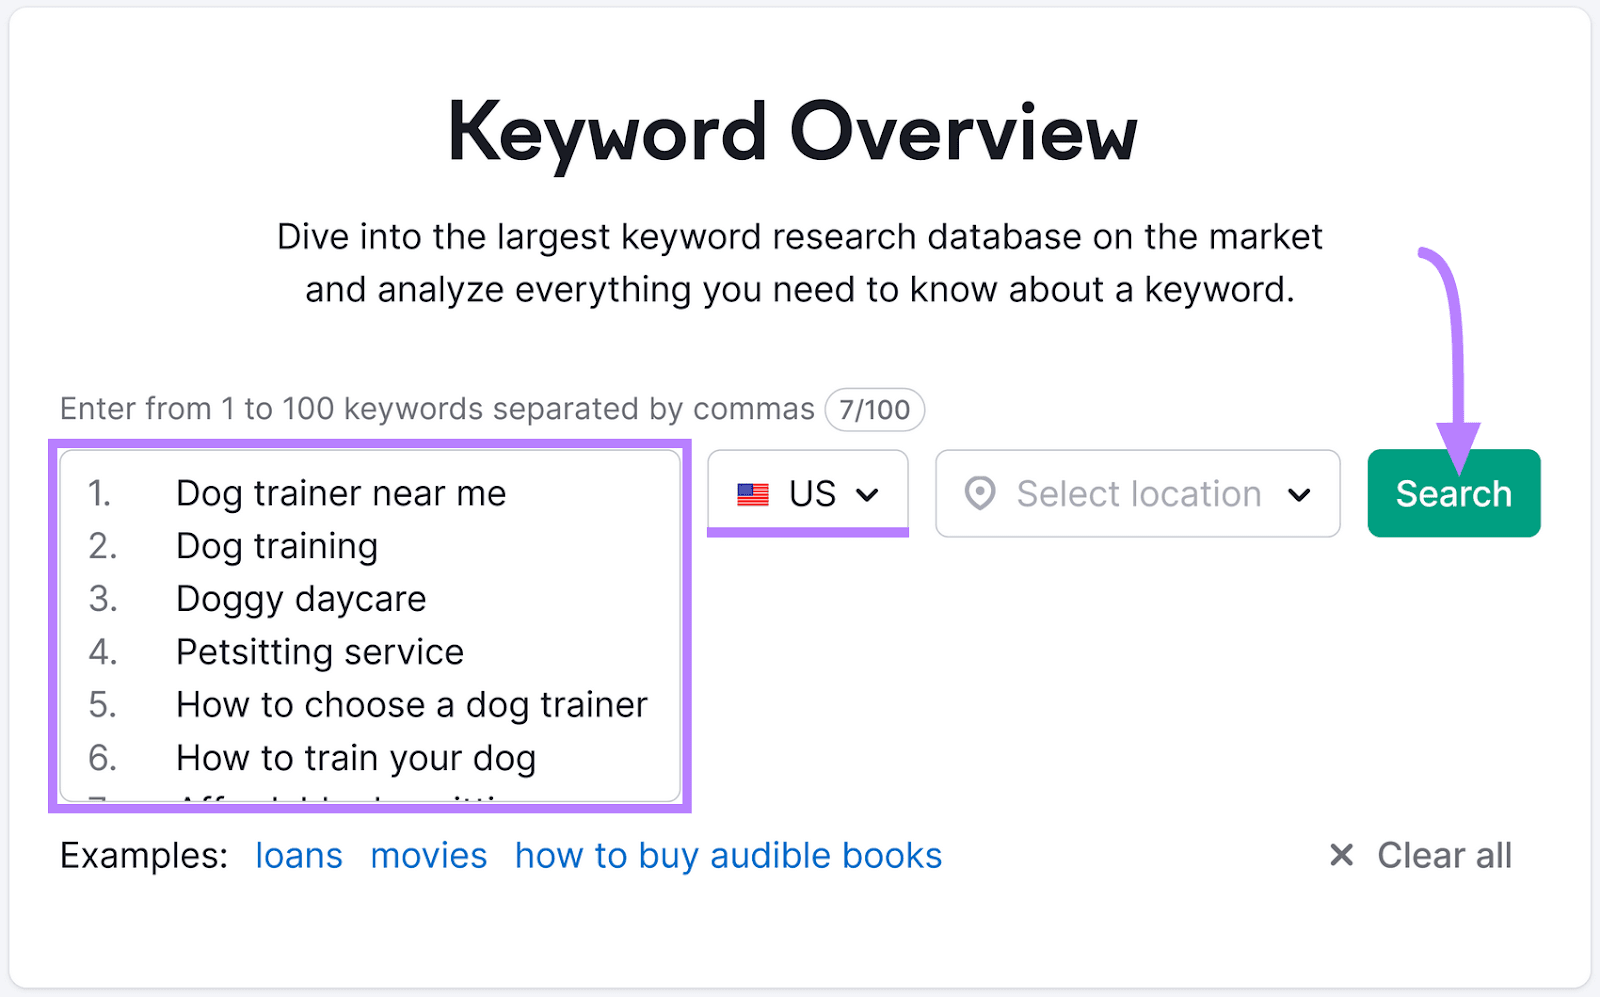 Keyword Overview search bar